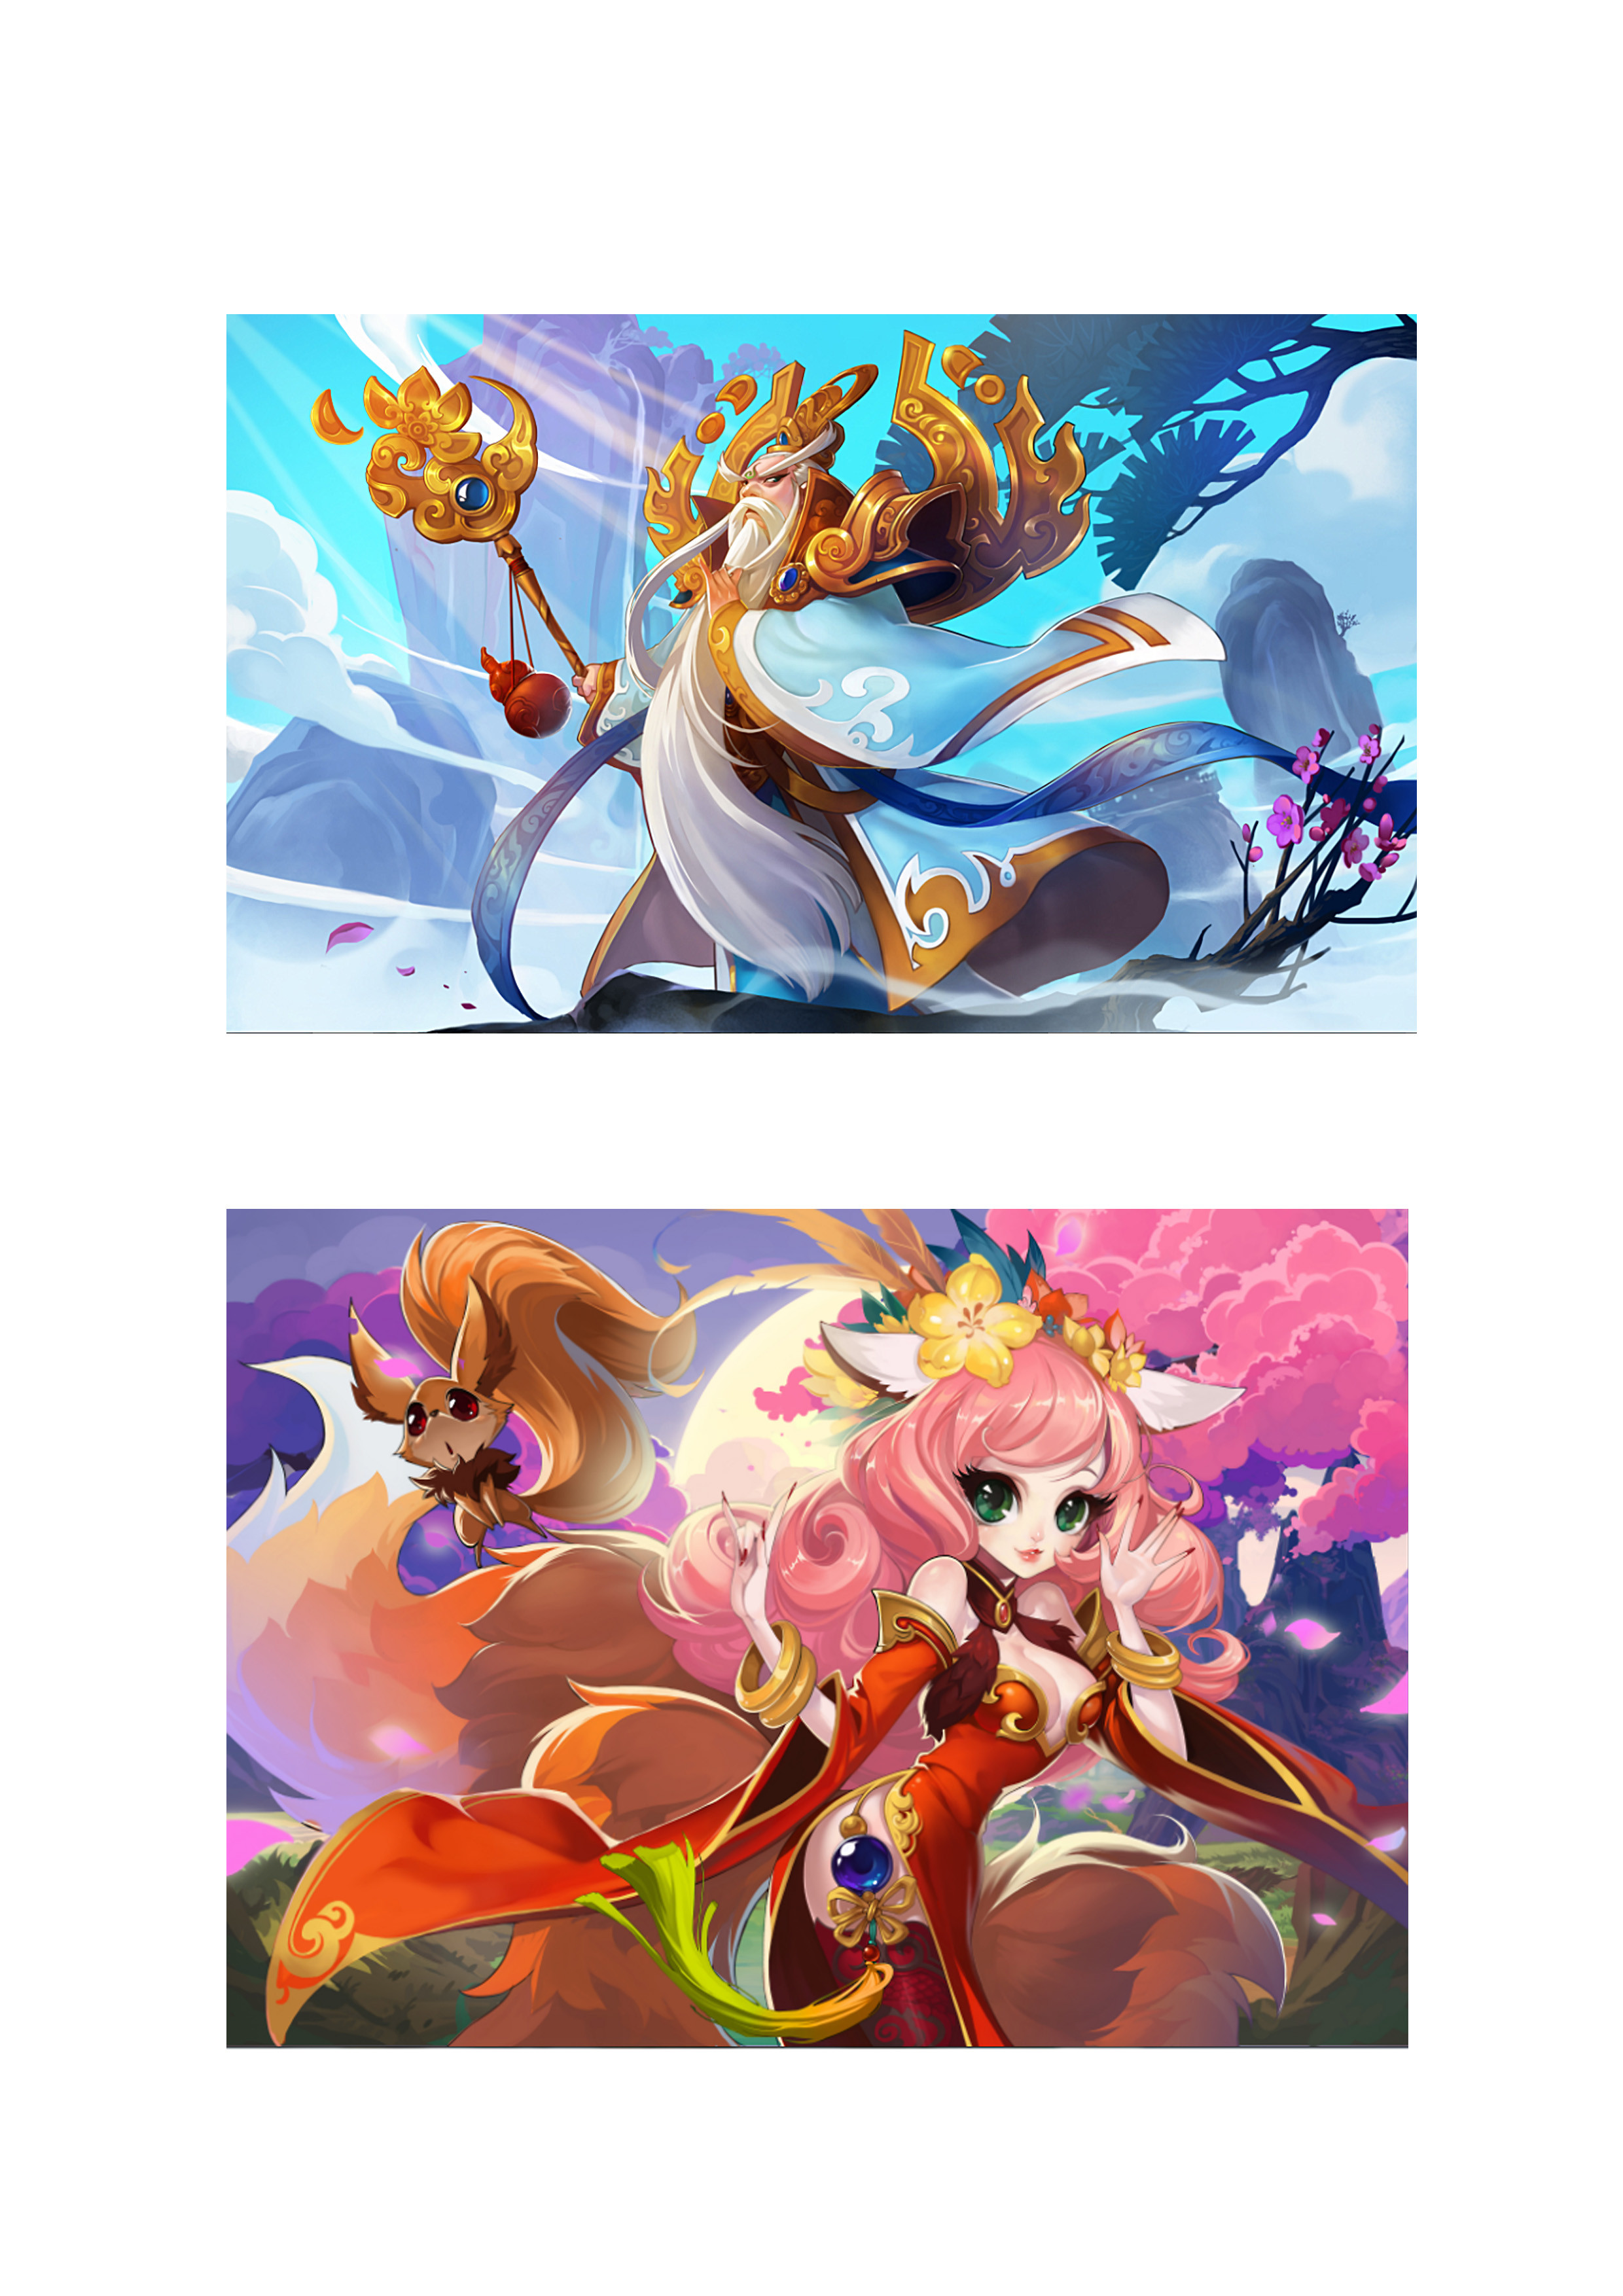 Illustrations for Tencent Game